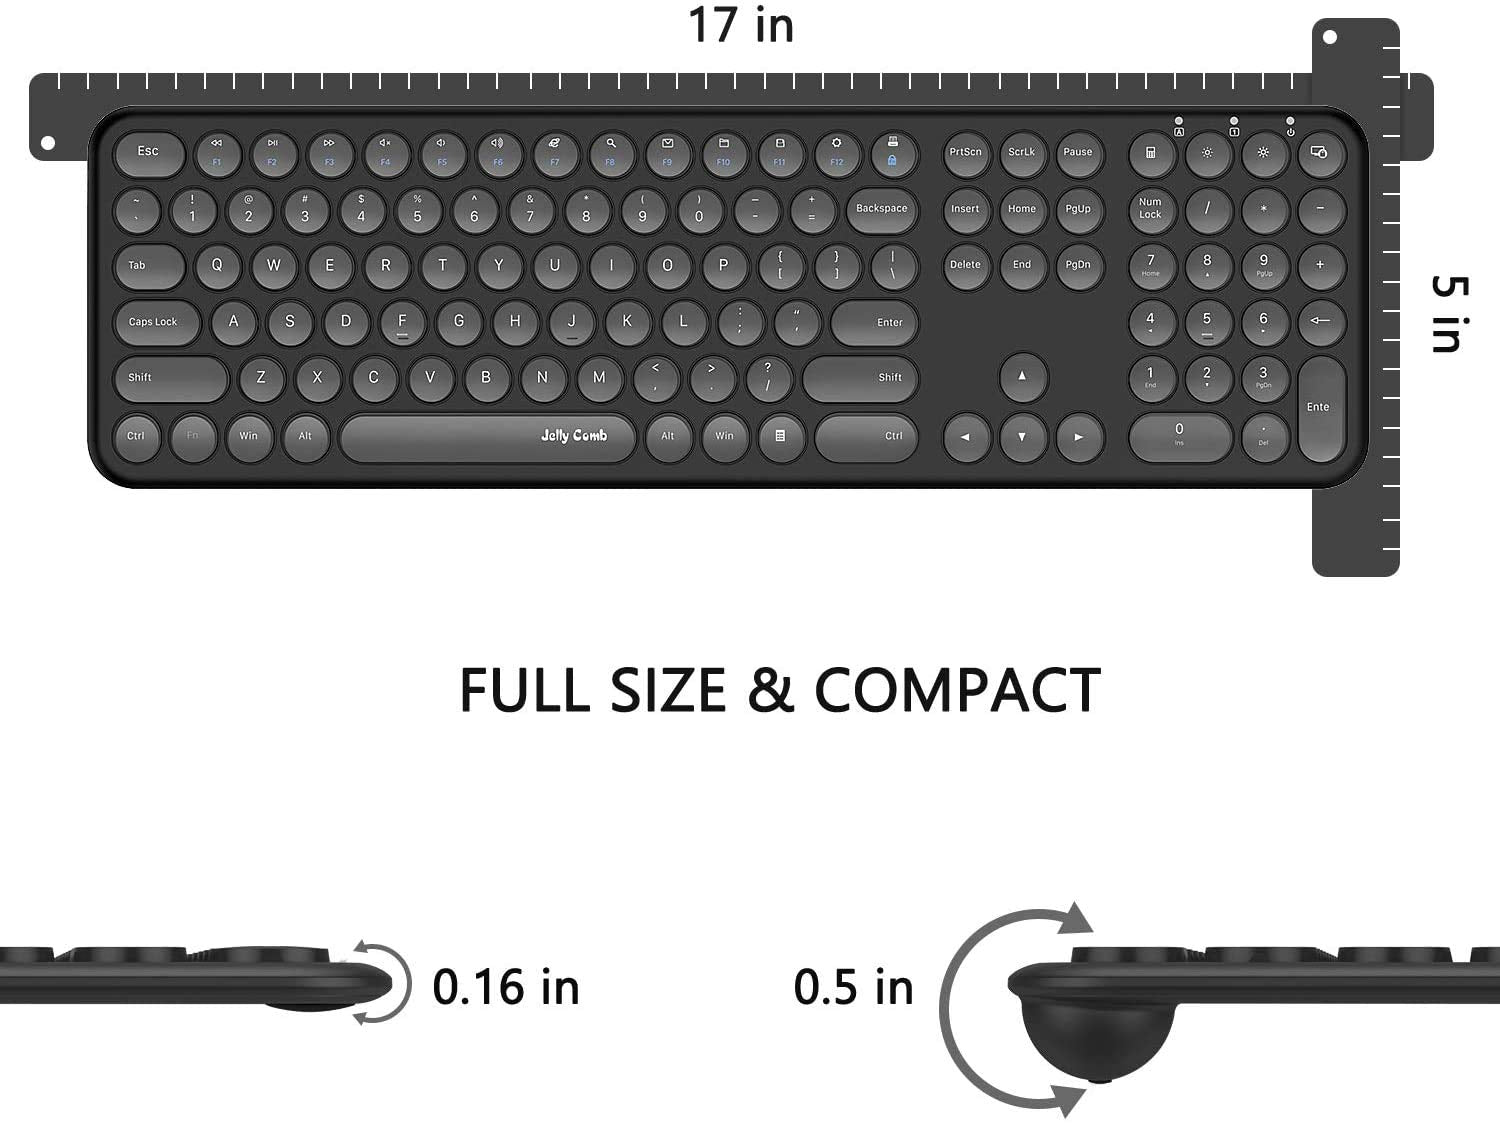 Jelly Comb 2.4GHz Full-Size Compact Wireless Mouse Keyboard. (LNC)